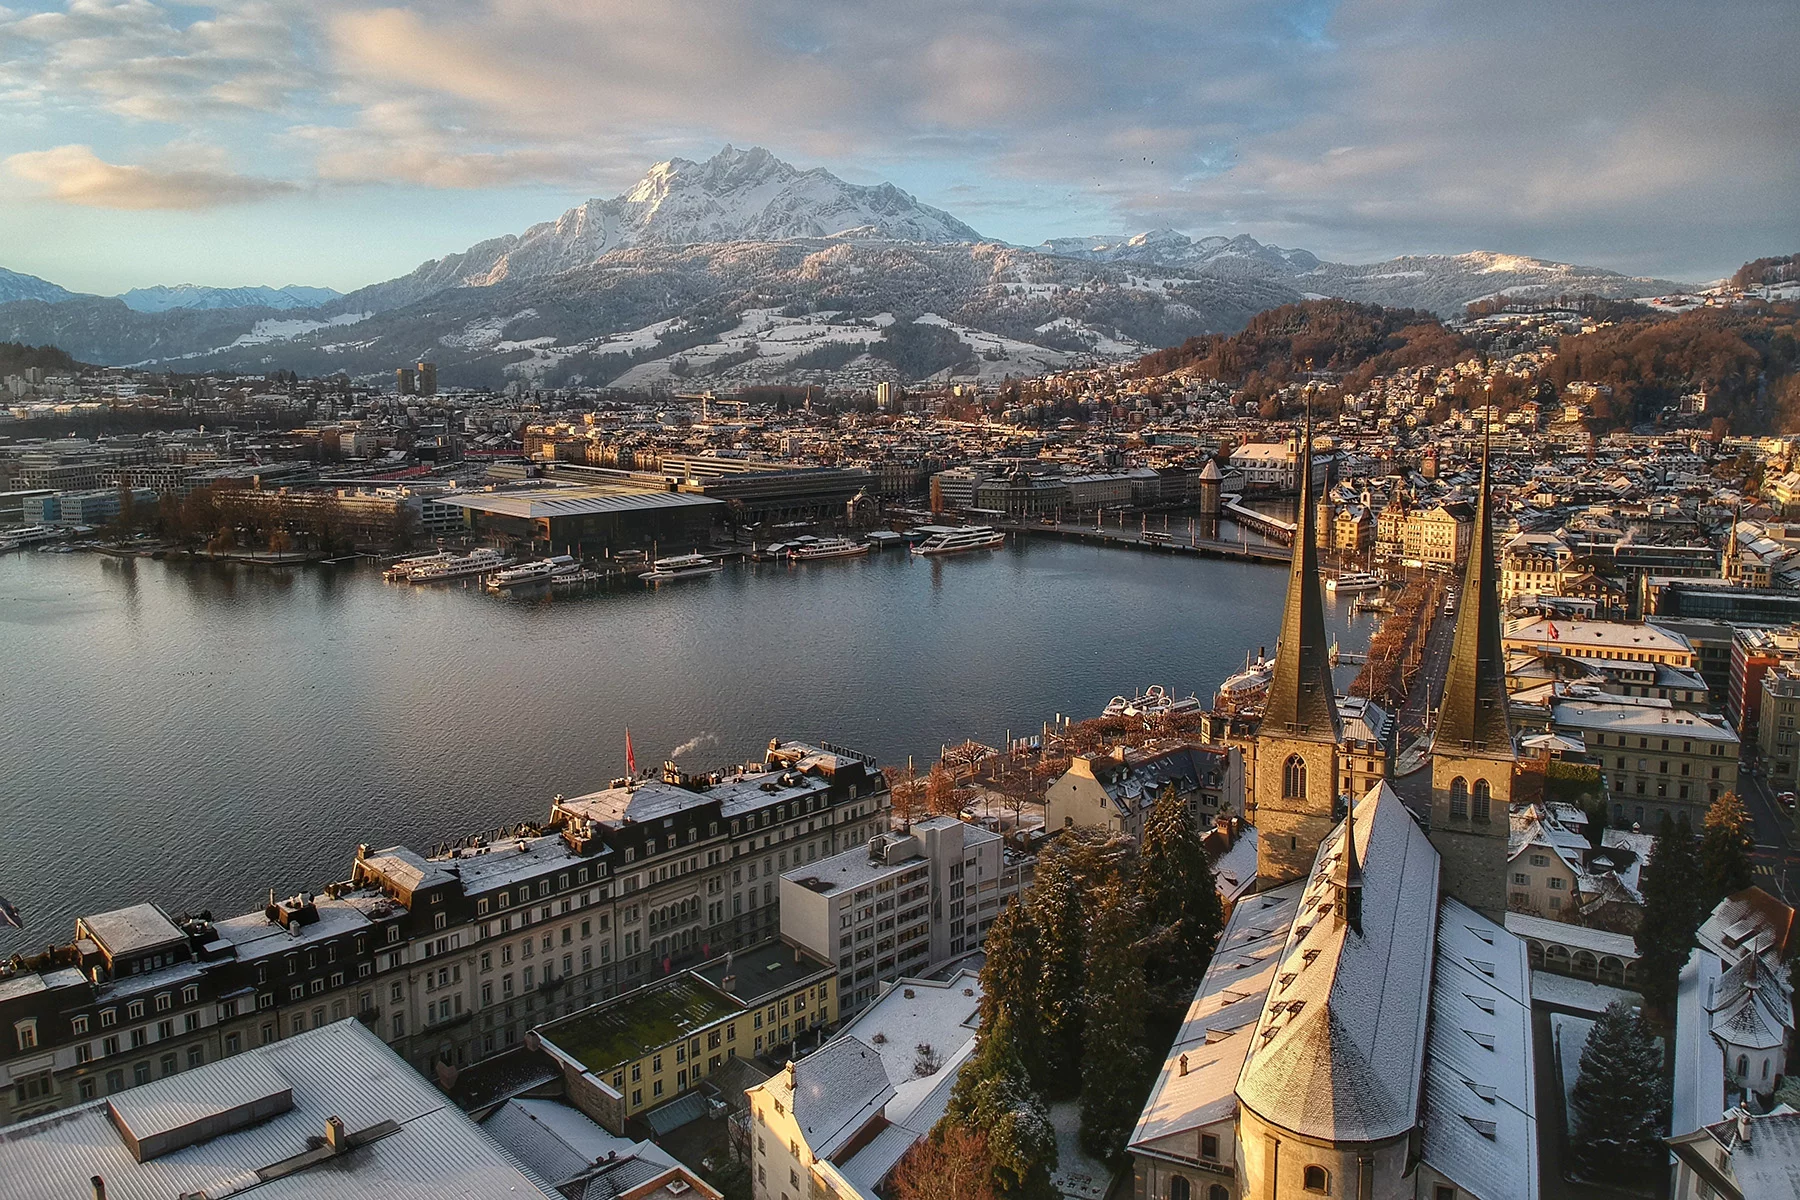 Lucerne, a city in Switzerland, covered in snow